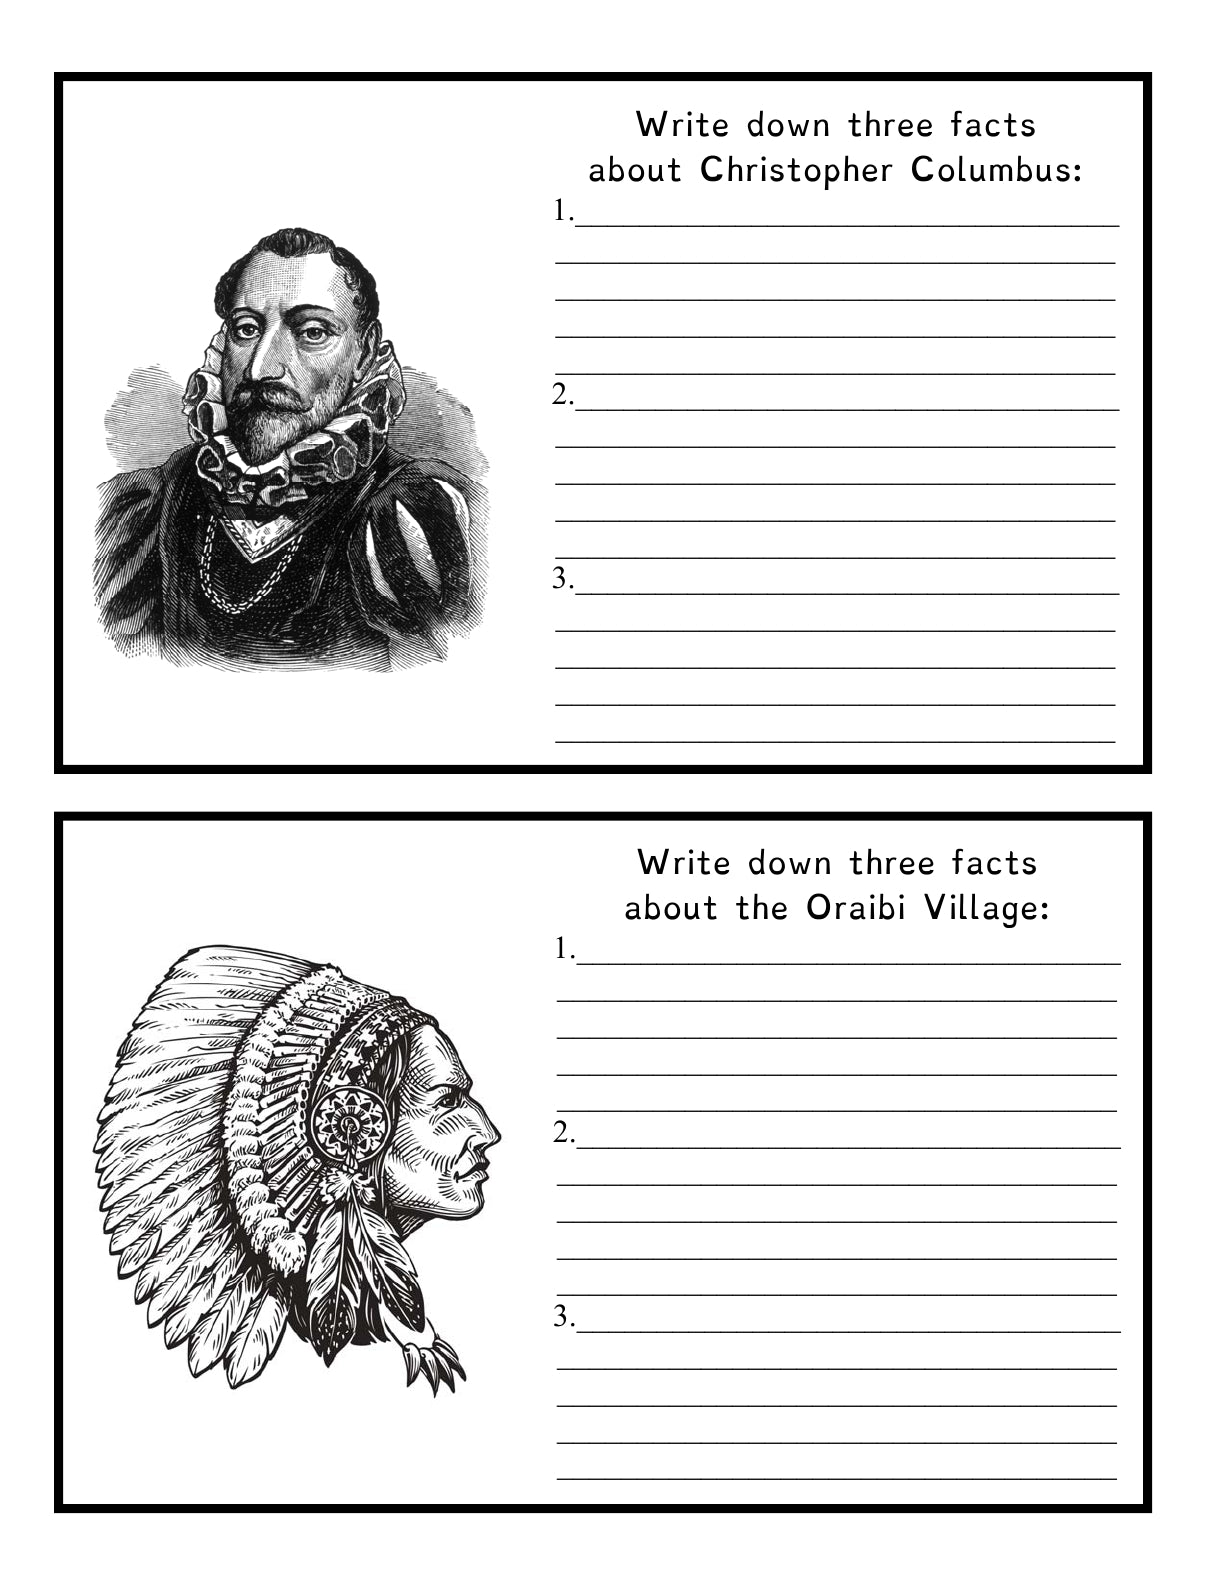 (Age 9+) American History - Do-It-Yourself - Time Travel Journal